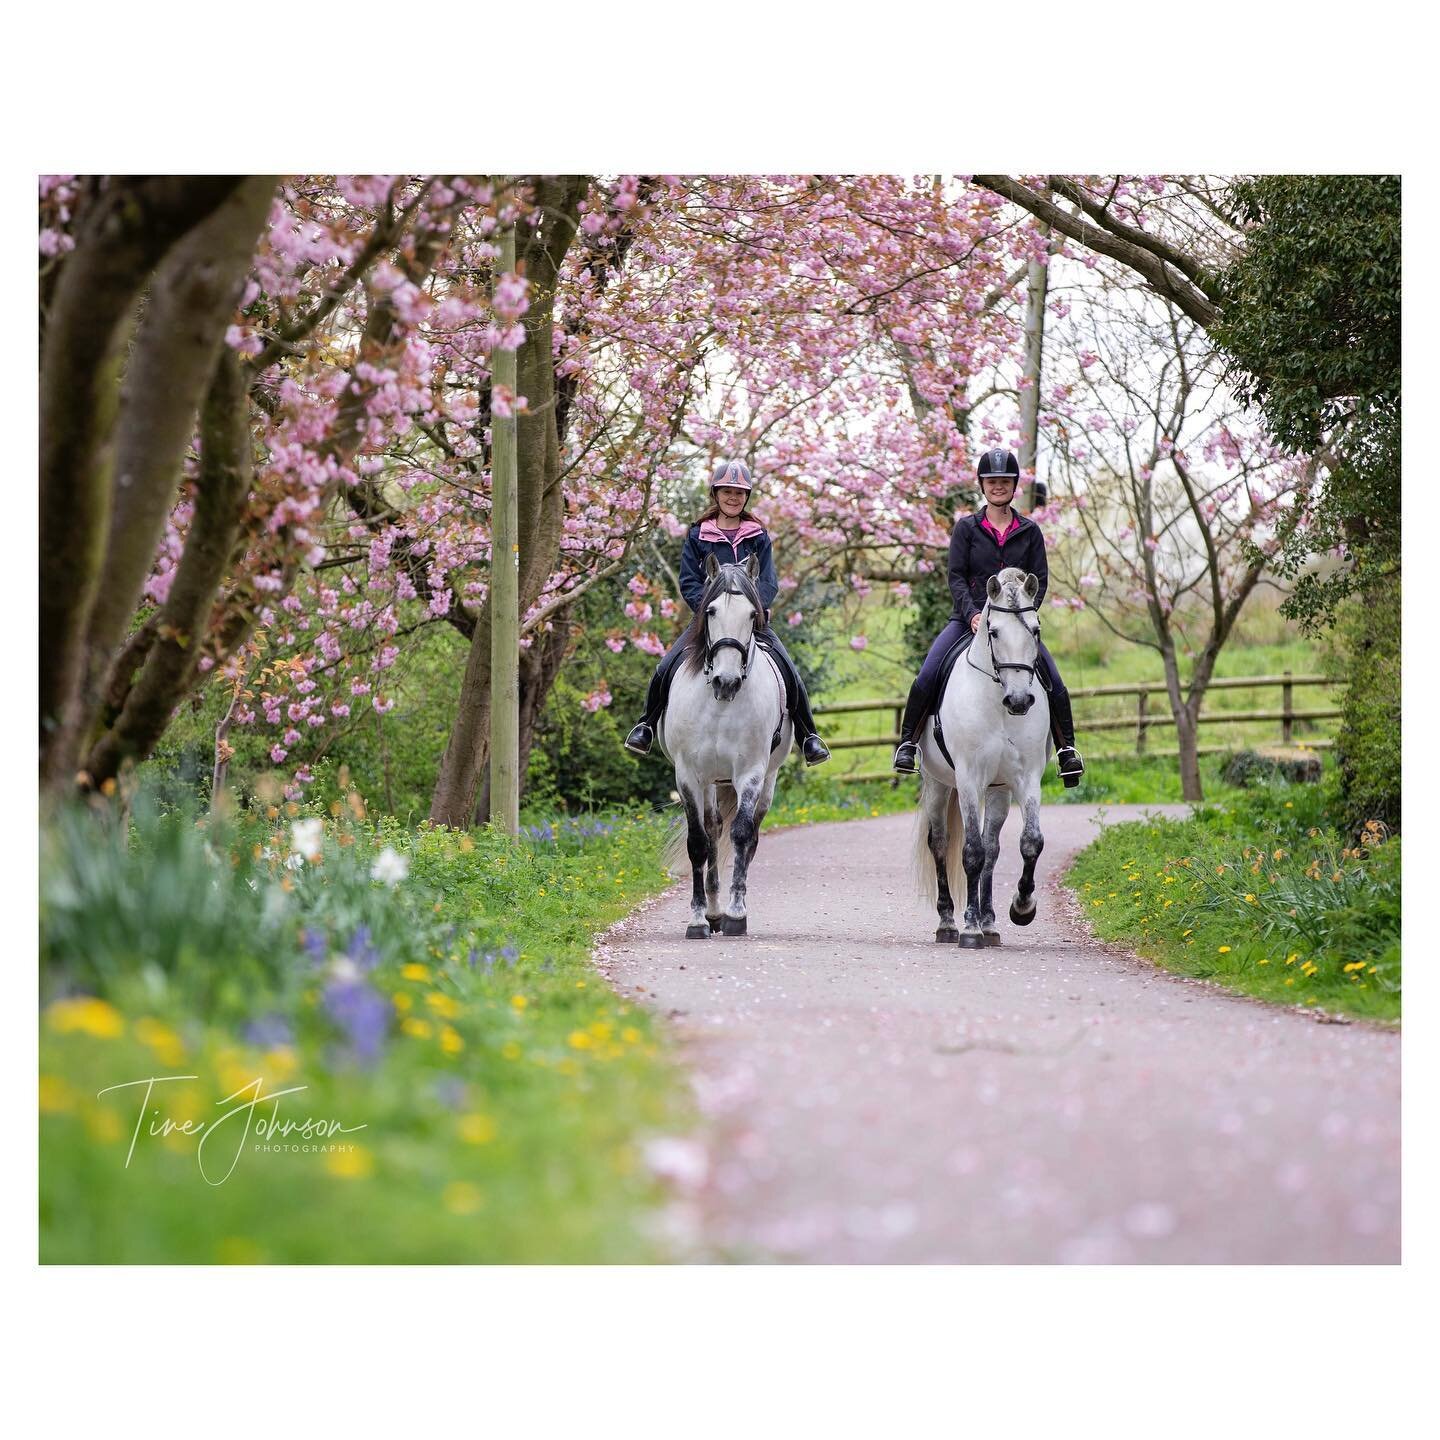 Hedges are slowing turning green and lots of trees are starting to turn pink! 🌸 
Not just great for enjoying a hack but also beautiful time to capture your horse!☀️ 

#spring #photoshoot #horse #cheshire #equinephotography #pinkblossom #horsephotogr